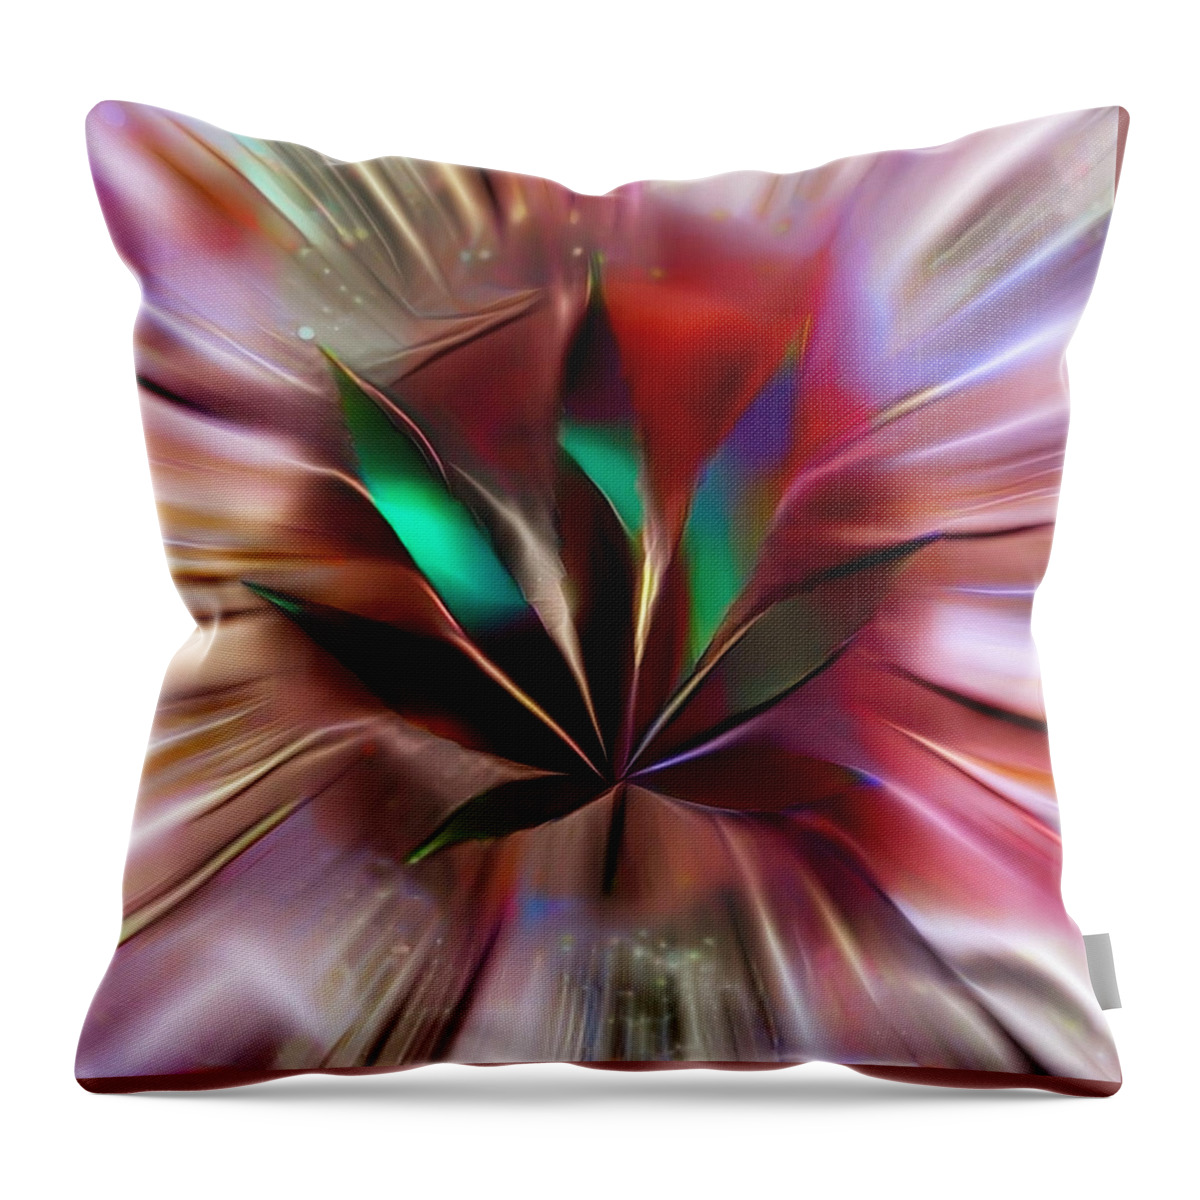 Abstract Throw Pillow featuring the digital art Vivid marijuana leaf by Bruce Rolff